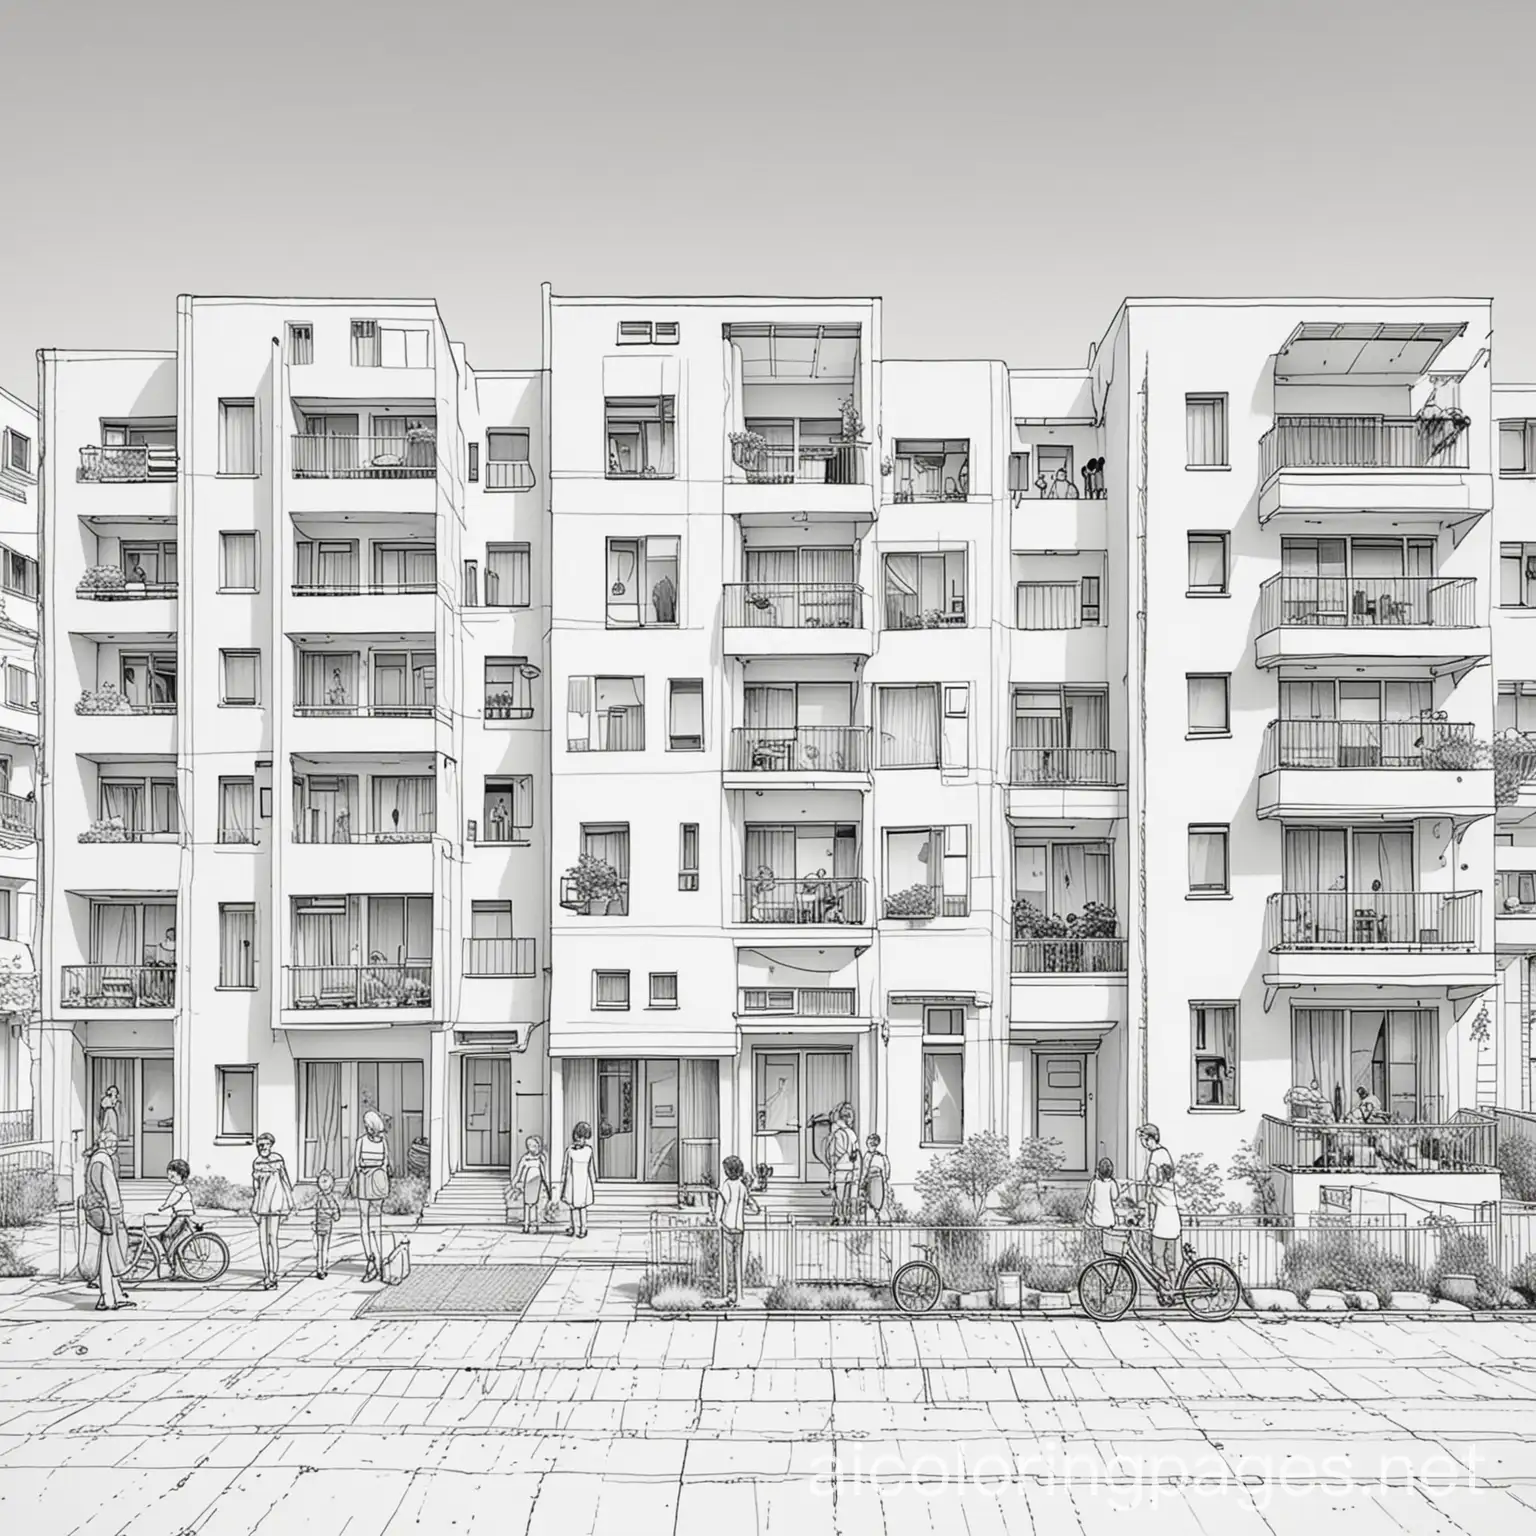 lots of modern apartments buildings with people, Coloring Page, black and white, line art, white background, Simplicity, Ample White Space. The background of the coloring page is plain white to make it easy for young children to color within the lines. The outlines of all the subjects are easy to distinguish, making it simple for kids to color without too much difficulty